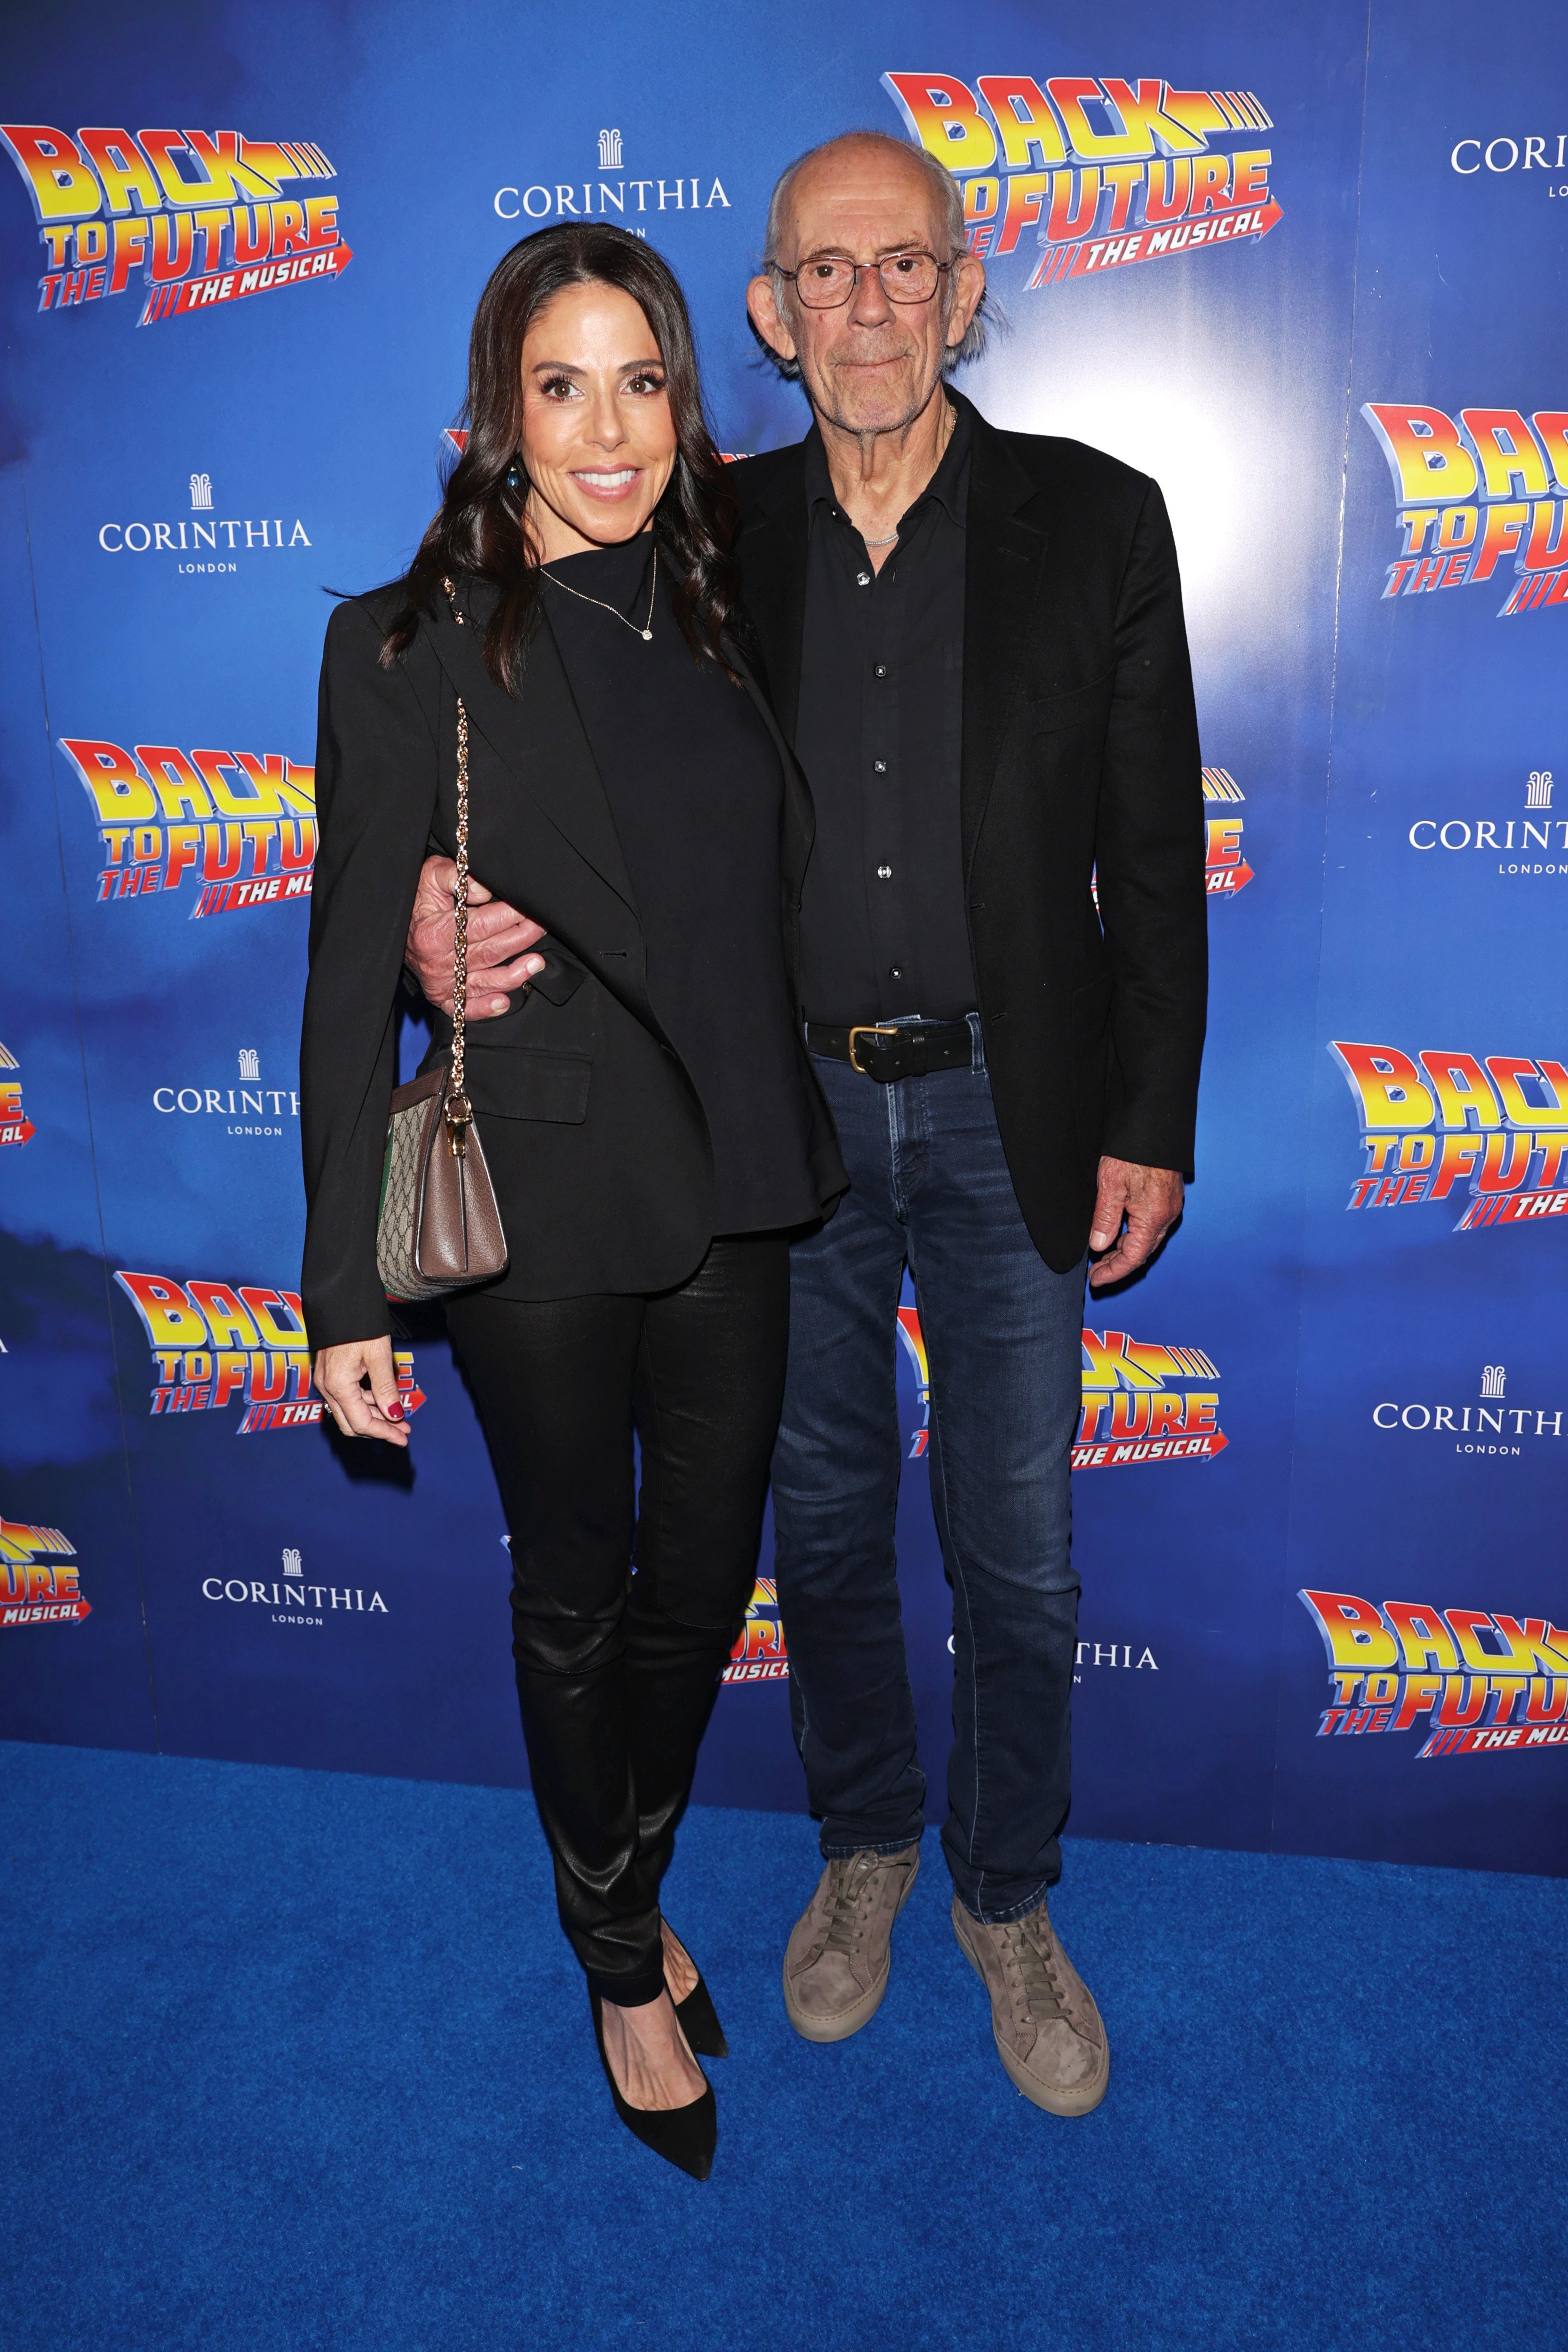 Lisa Loiacono and Christopher Lloyd at the opening night of "Back To The Future: The Musical" on September 13, 2021, in London, England. | Source: Getty Images